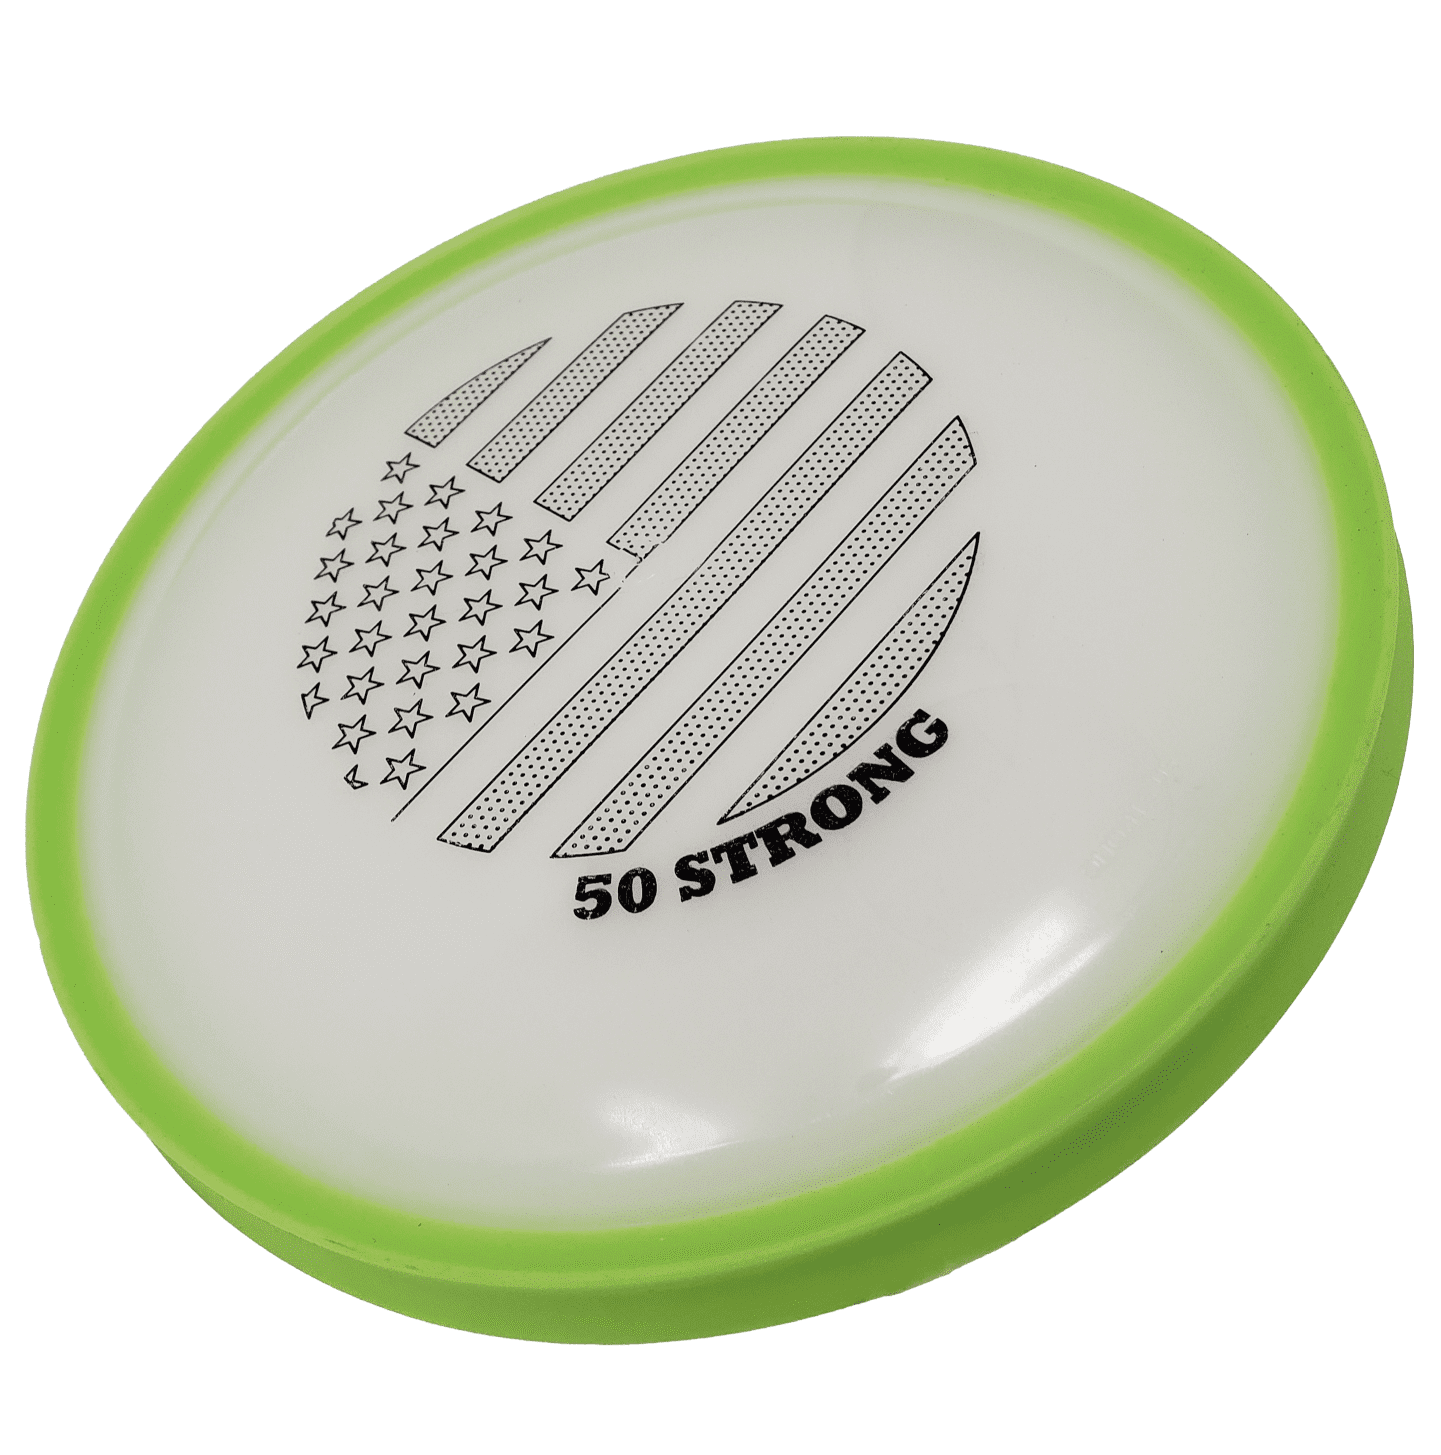 Fun Game for Summer Made in USA 50 Strong Ultimate Frisbee 175 gram Flying Sporting Disc One Disc Best Beach Toy for Kids and Adults